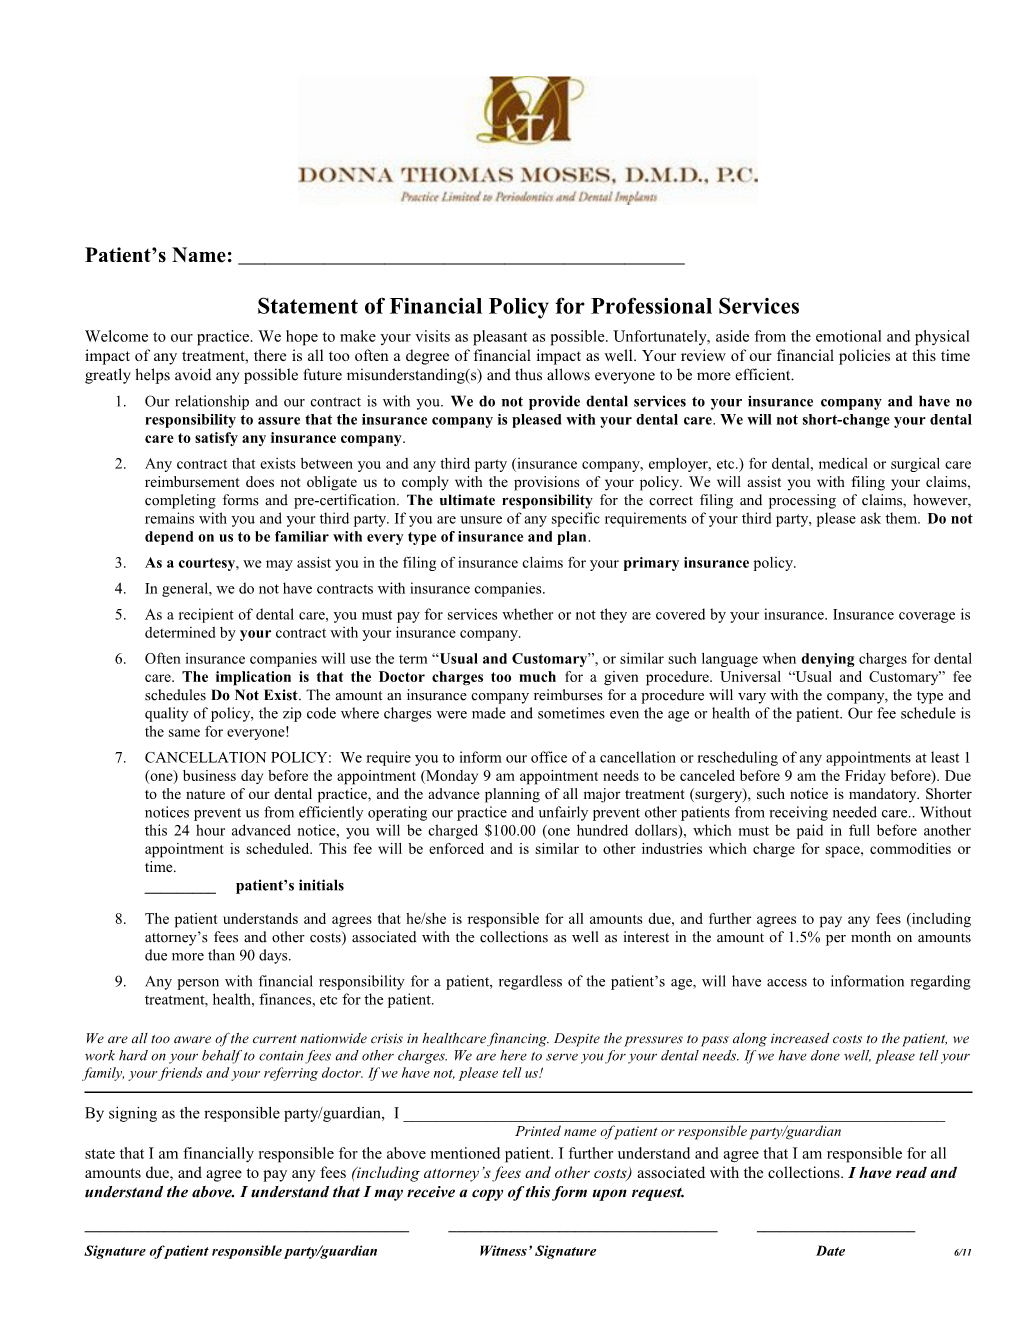 Statement of Financial Policy for Professional Services